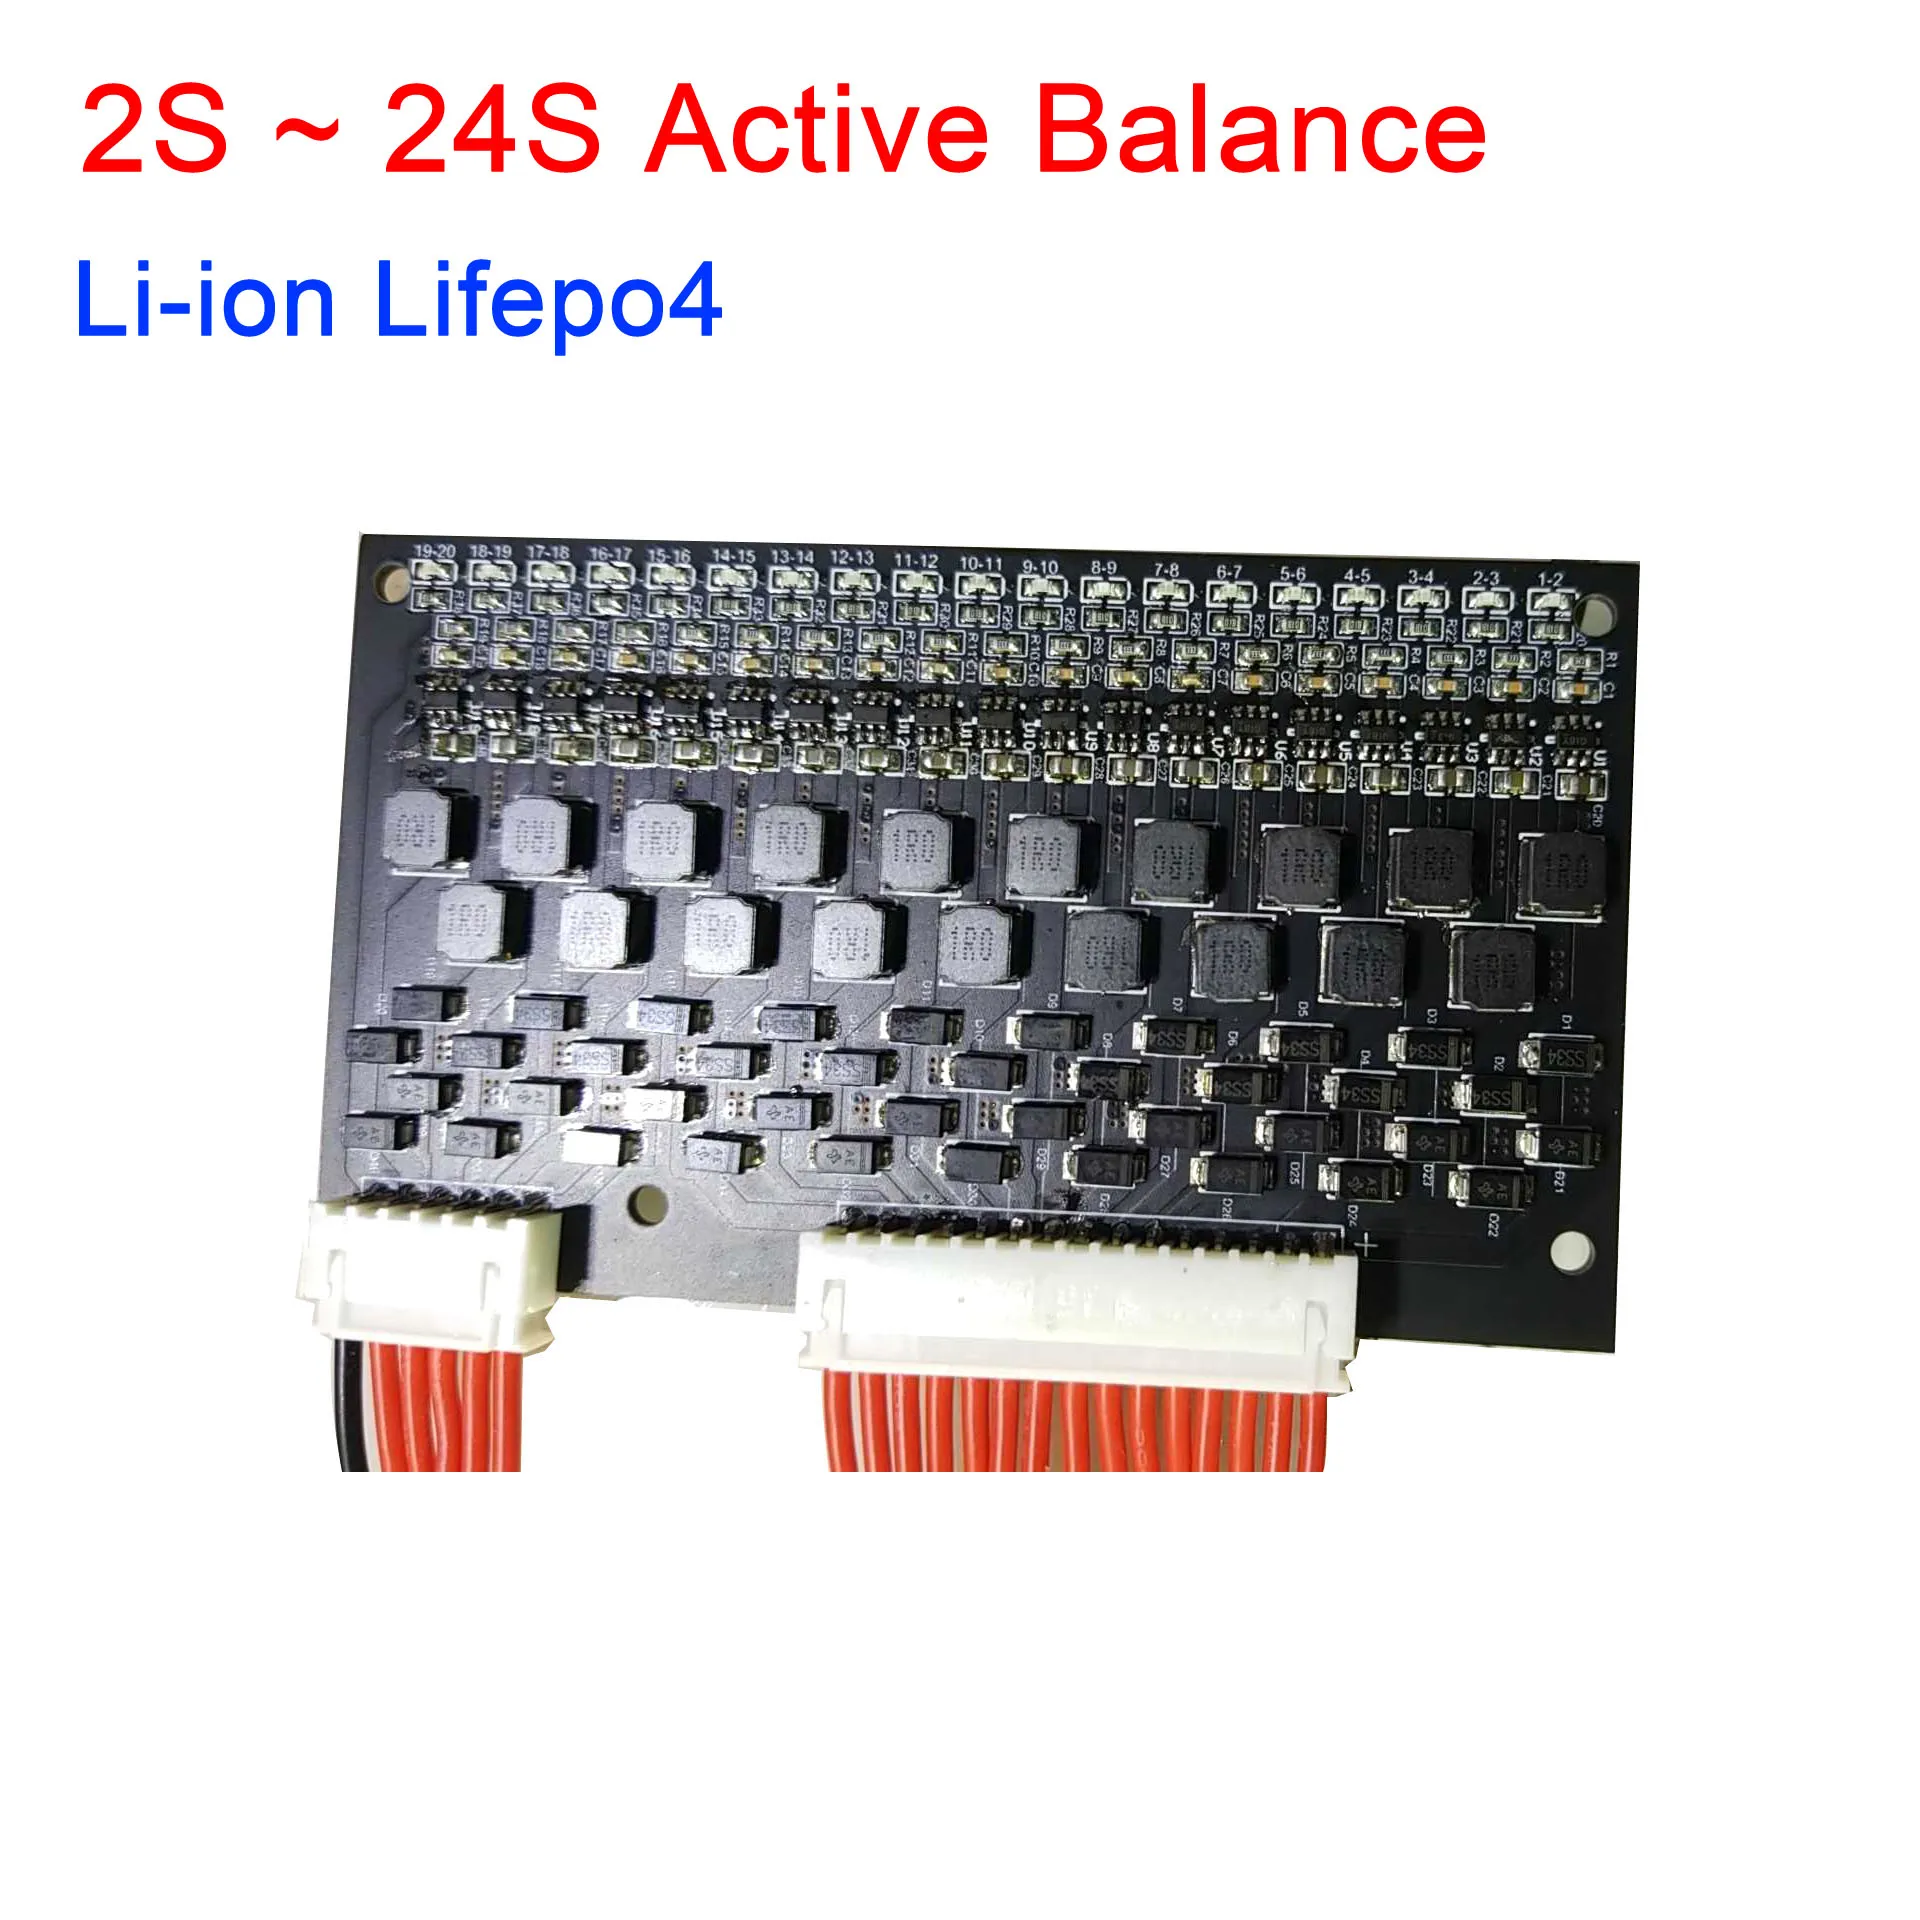 Active Balance board 2S ~ 24S 1.5A Li-ion Lipo Lifepo4 Lithium Battery Energy Transfer equalizer protection Board 4S 7S 14S 16S